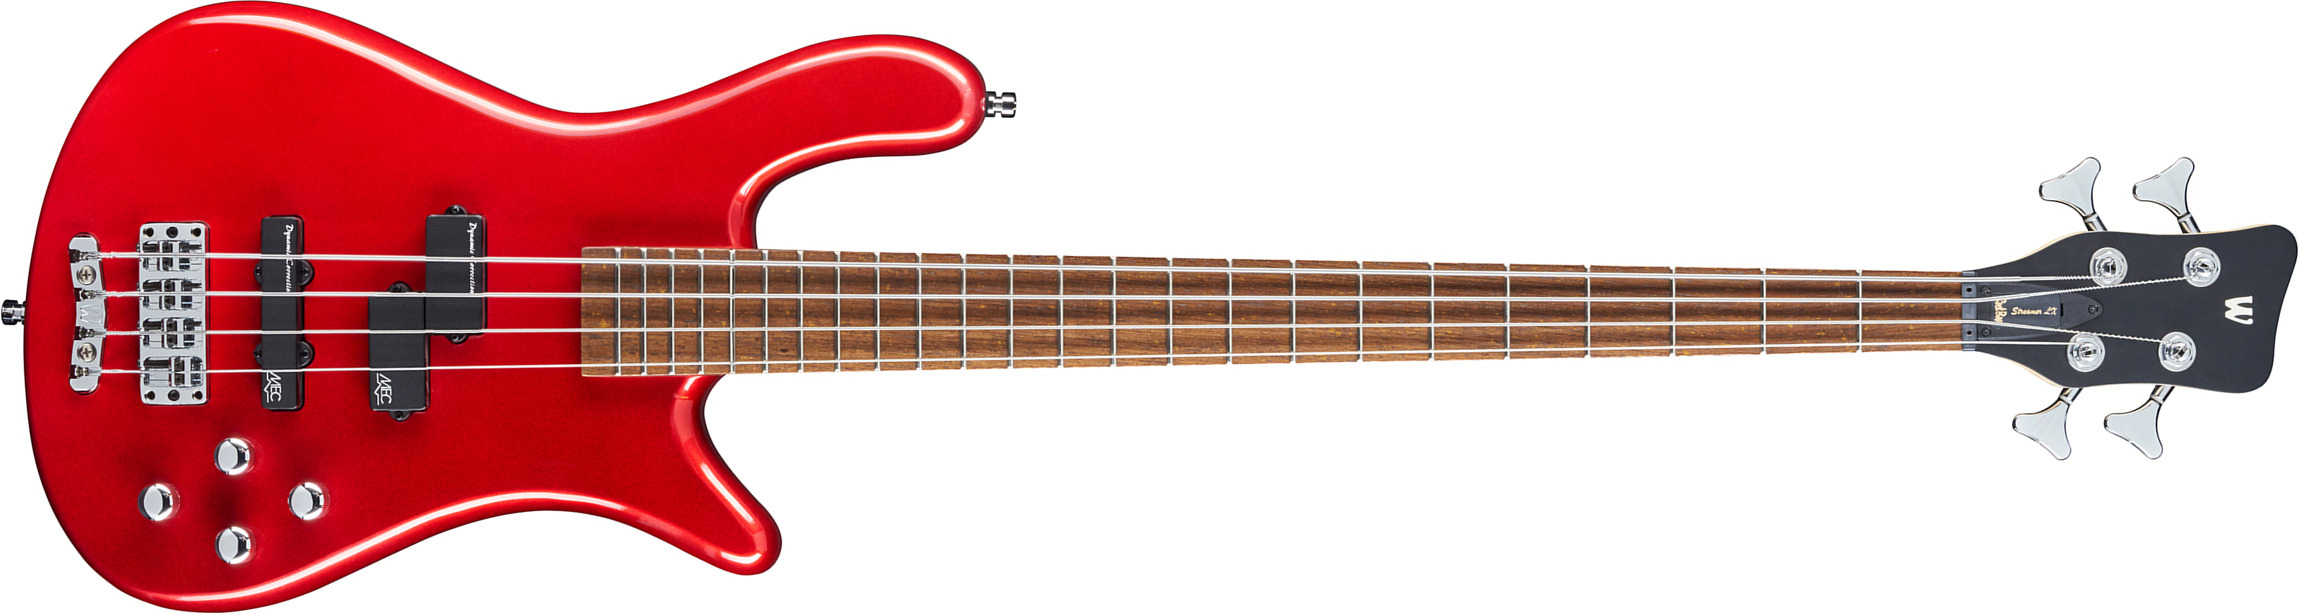 Warwick Streamer Lx4 Rockbass Active Wen - Red Metallic - Basse Électrique Solid Body - Main picture